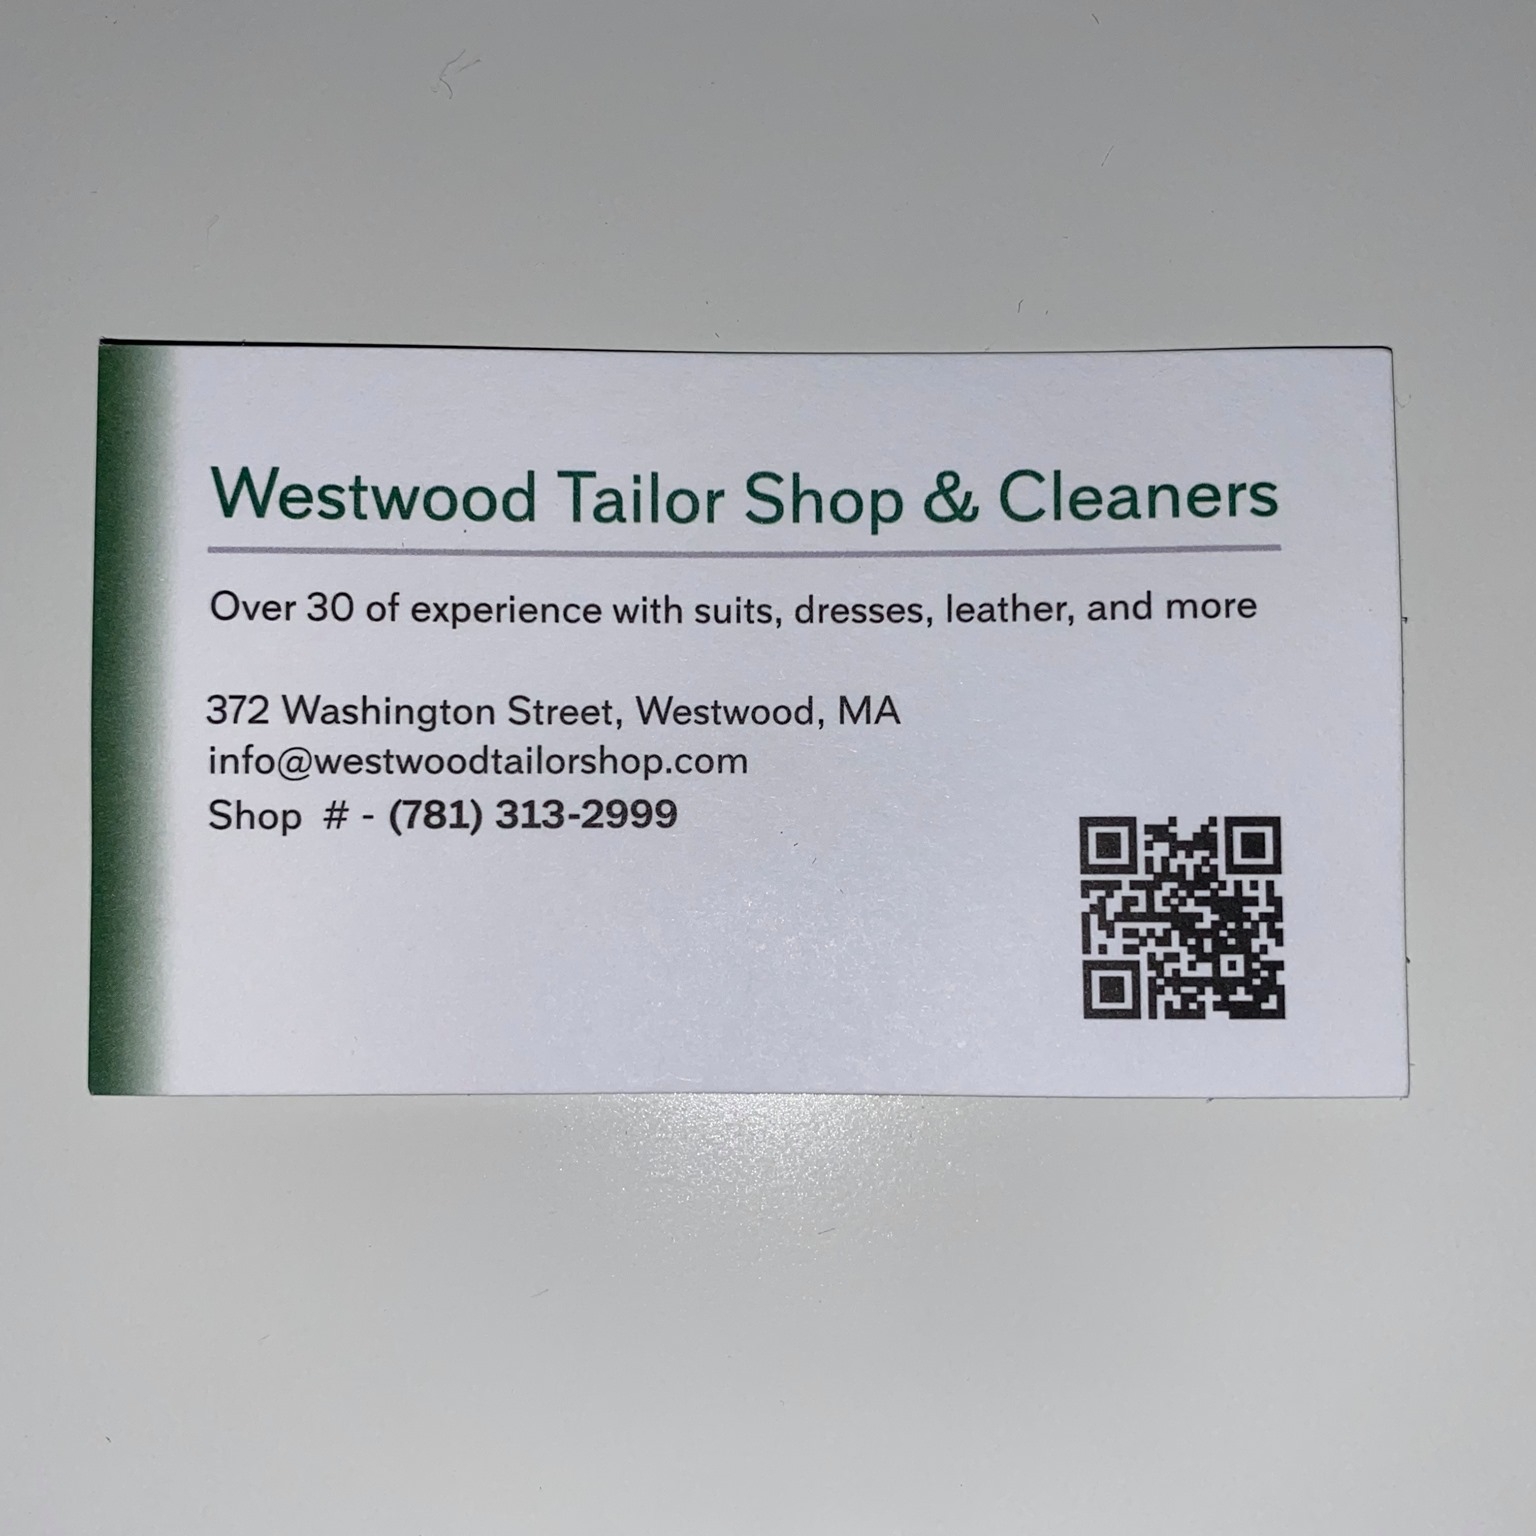 Westwood Tailor Shop & Cleaners